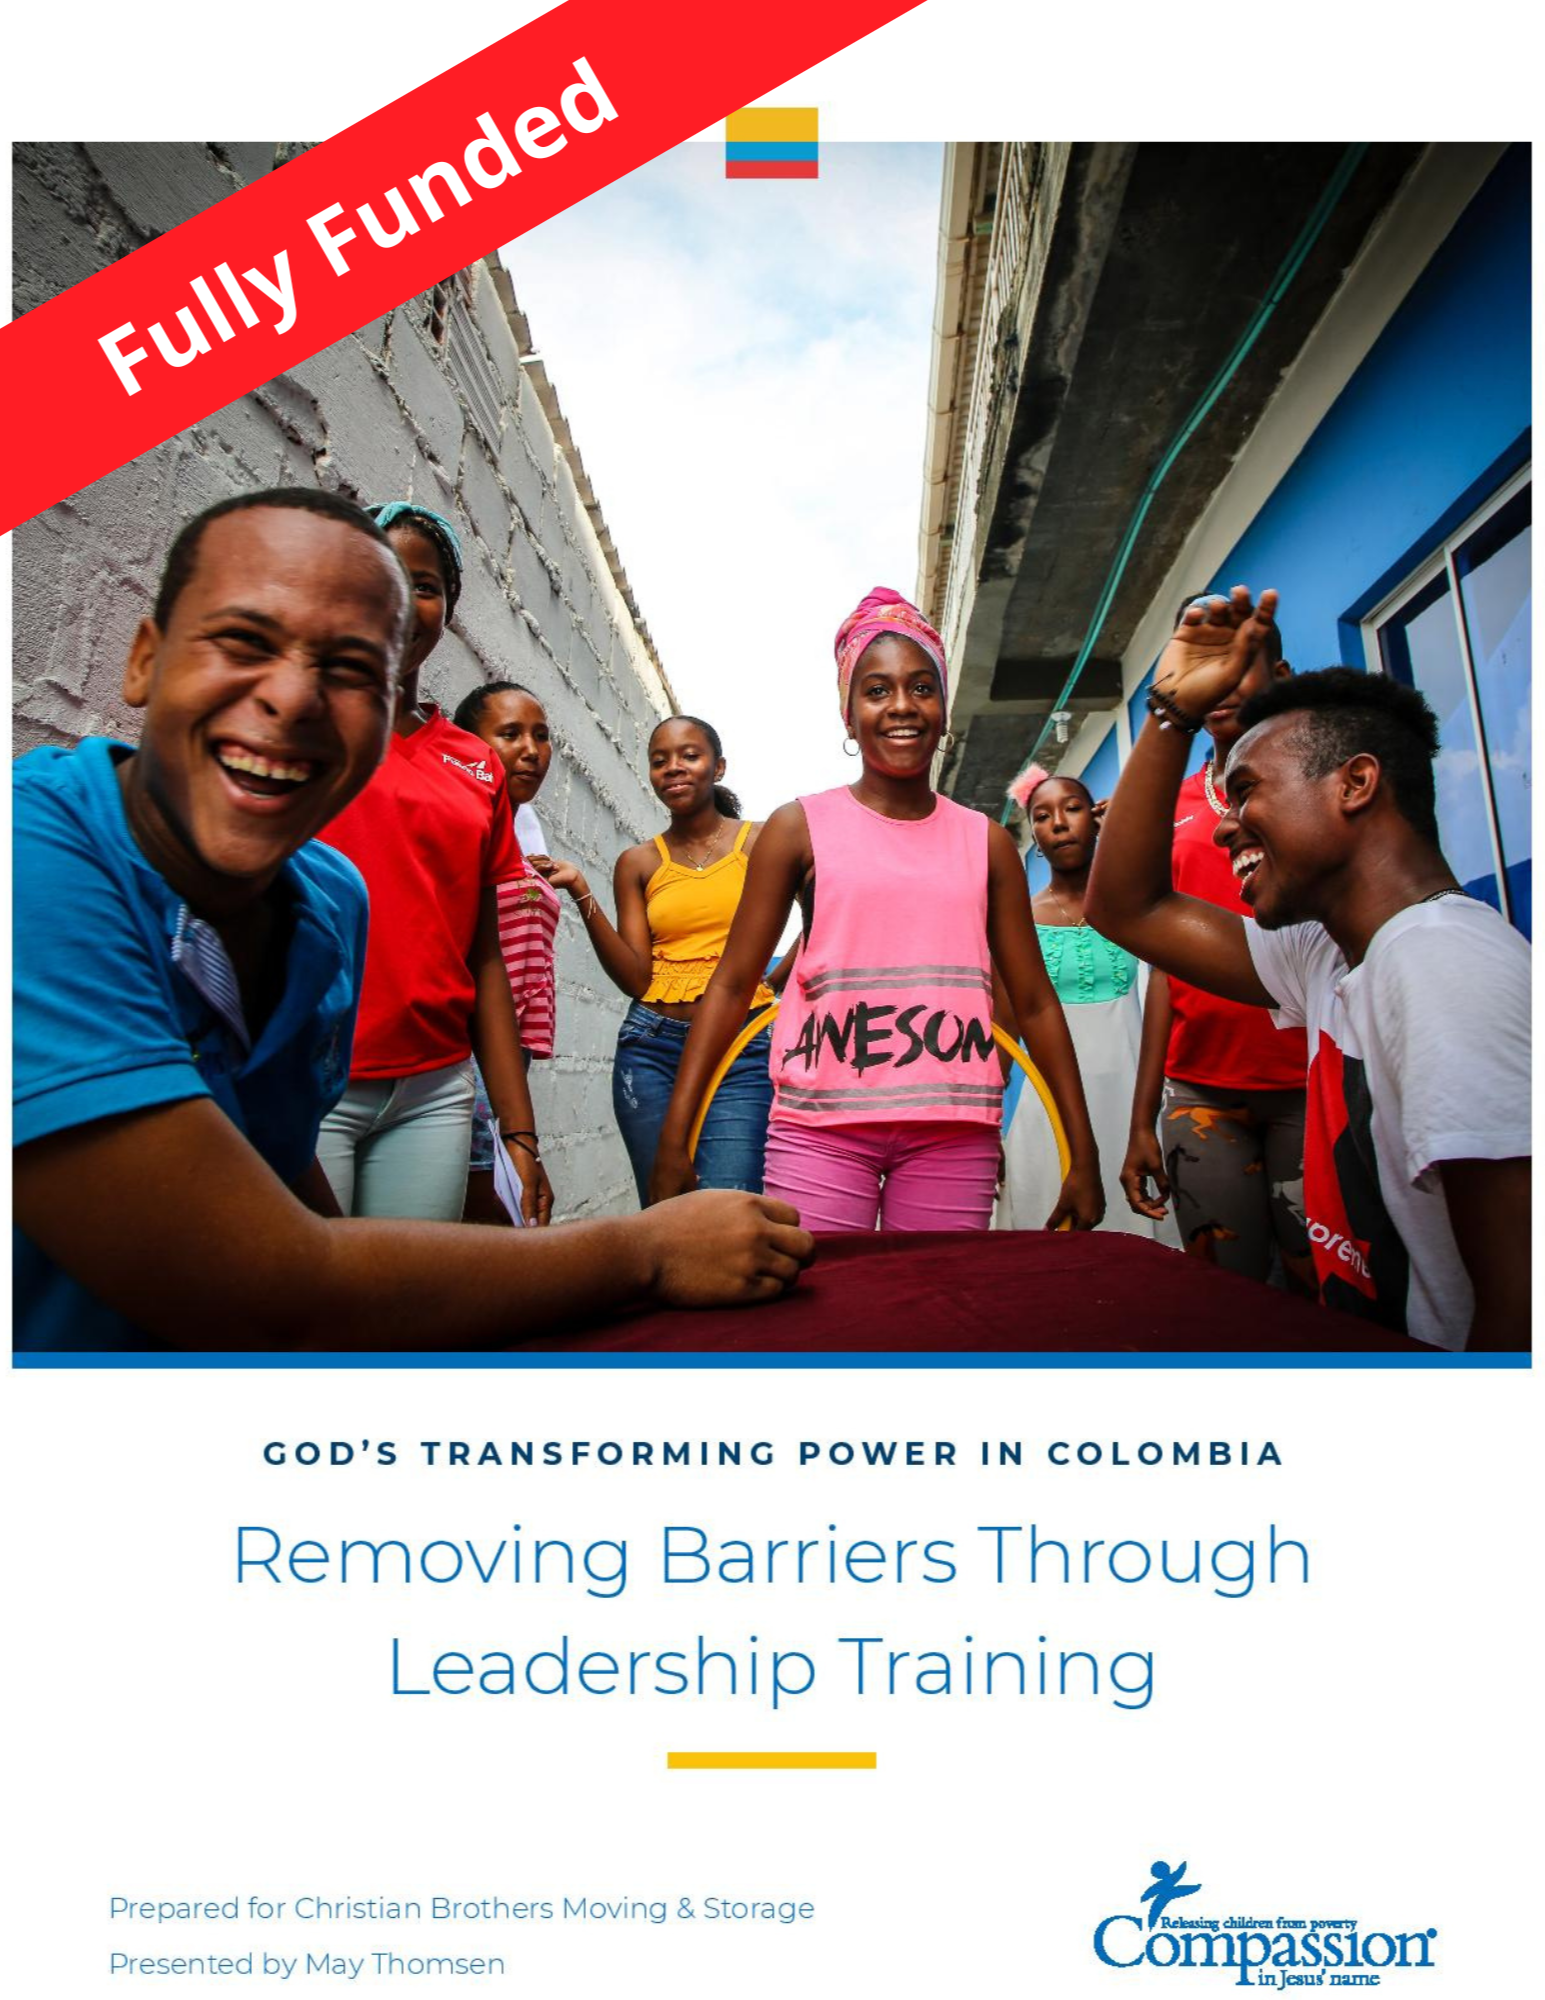 
Fully Funded: Removing Barriers Through Leadership Training